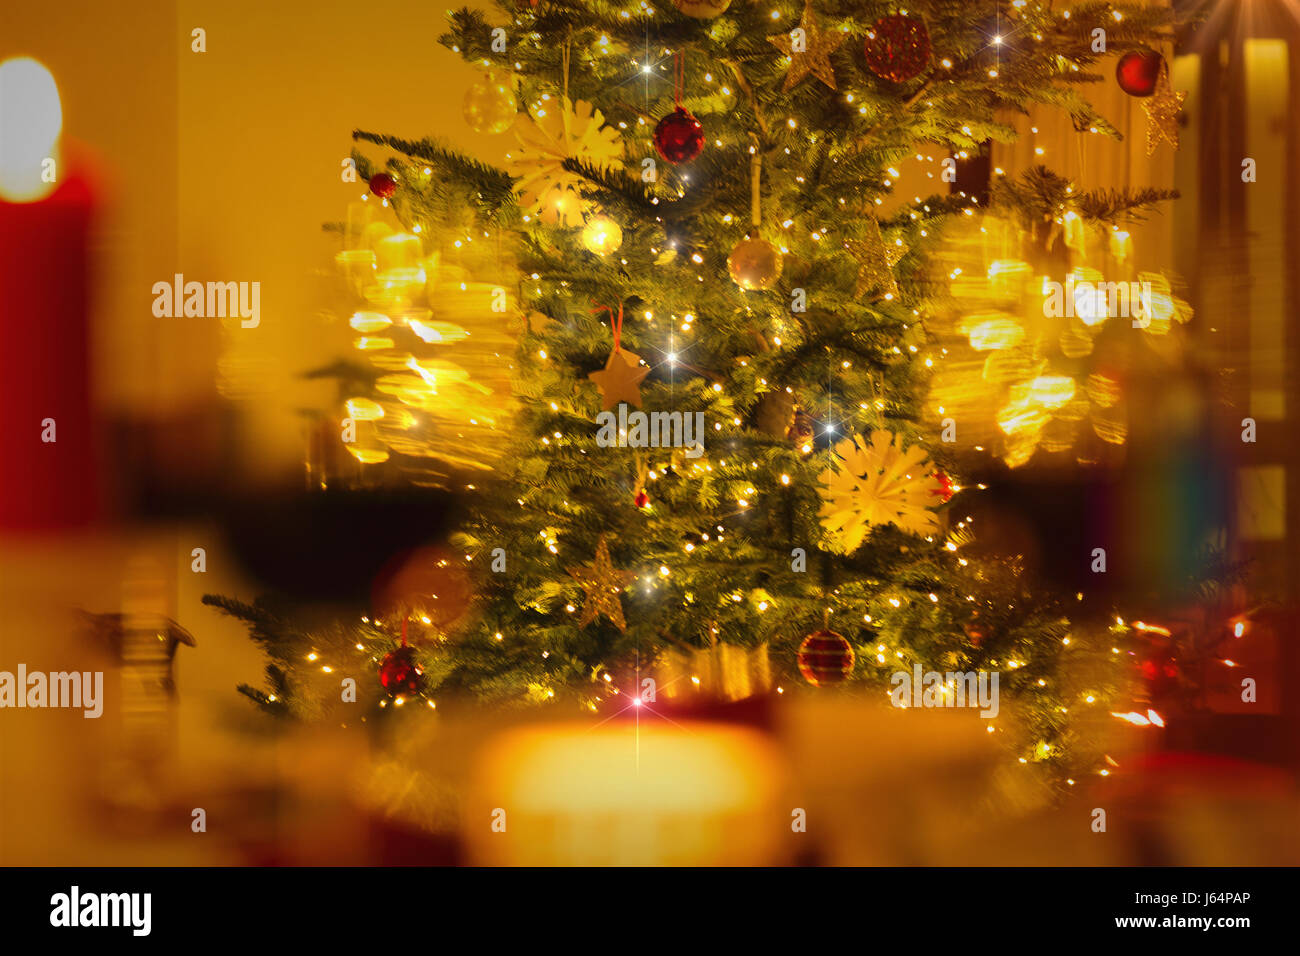 Illuminated Christmas tree with ornaments and string lights Stock Photo